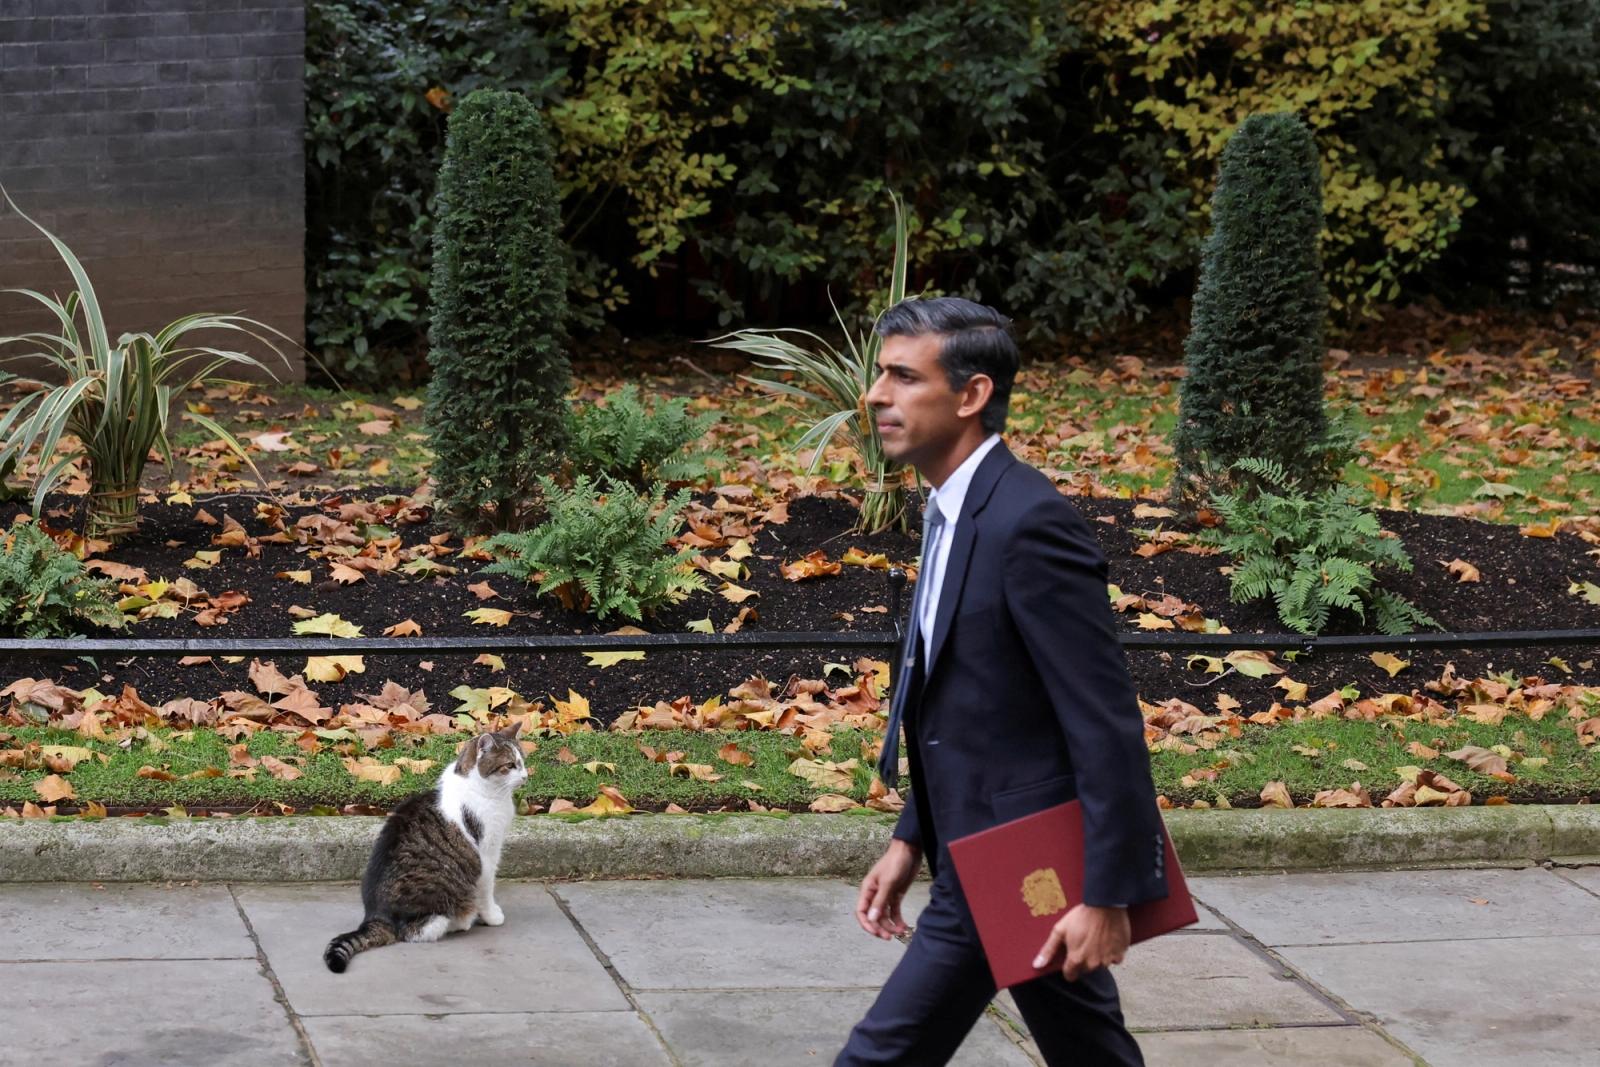 Britain's new Prime Minister Rishi Sunak walks past Larry the cat outside Downing Street, in London, Britain, October 25, 2022.